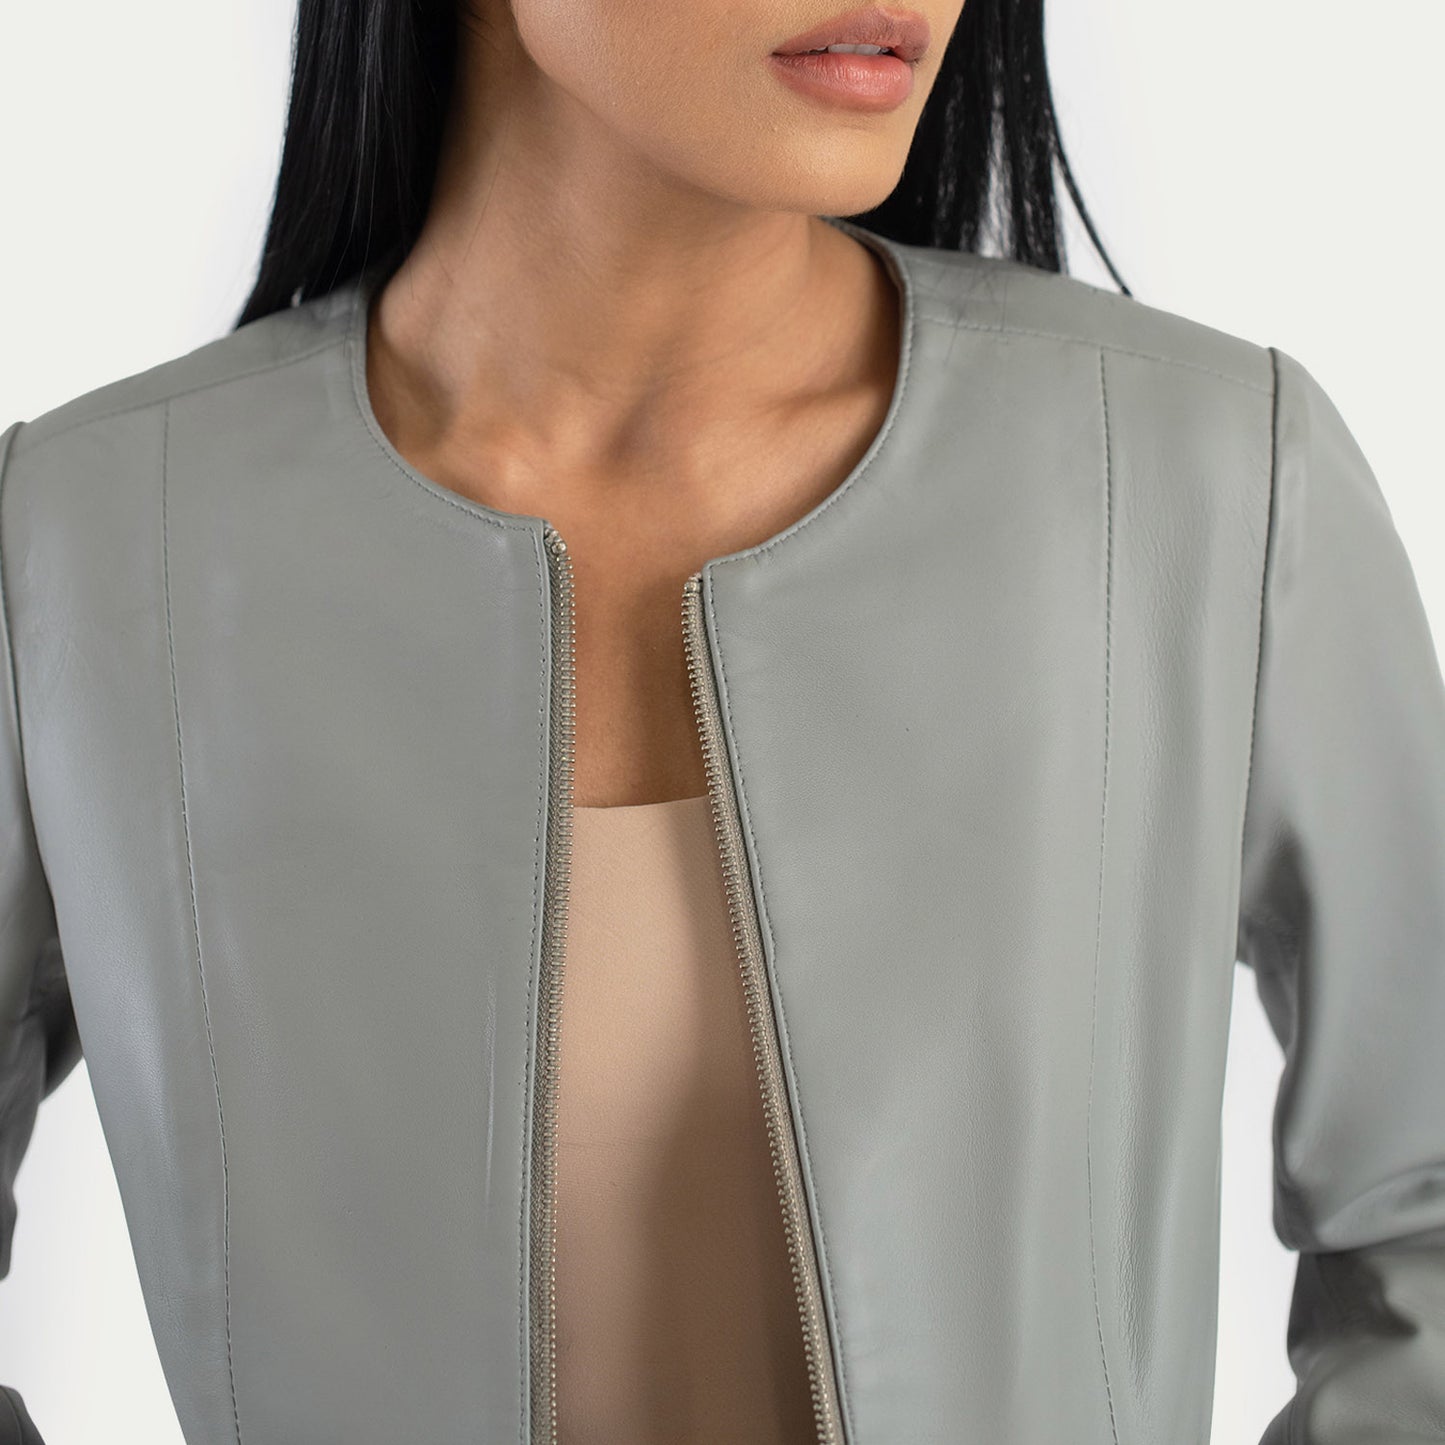 Buy Best Classic Looking Fashion Elixir Grey Collarless Leather Jacket